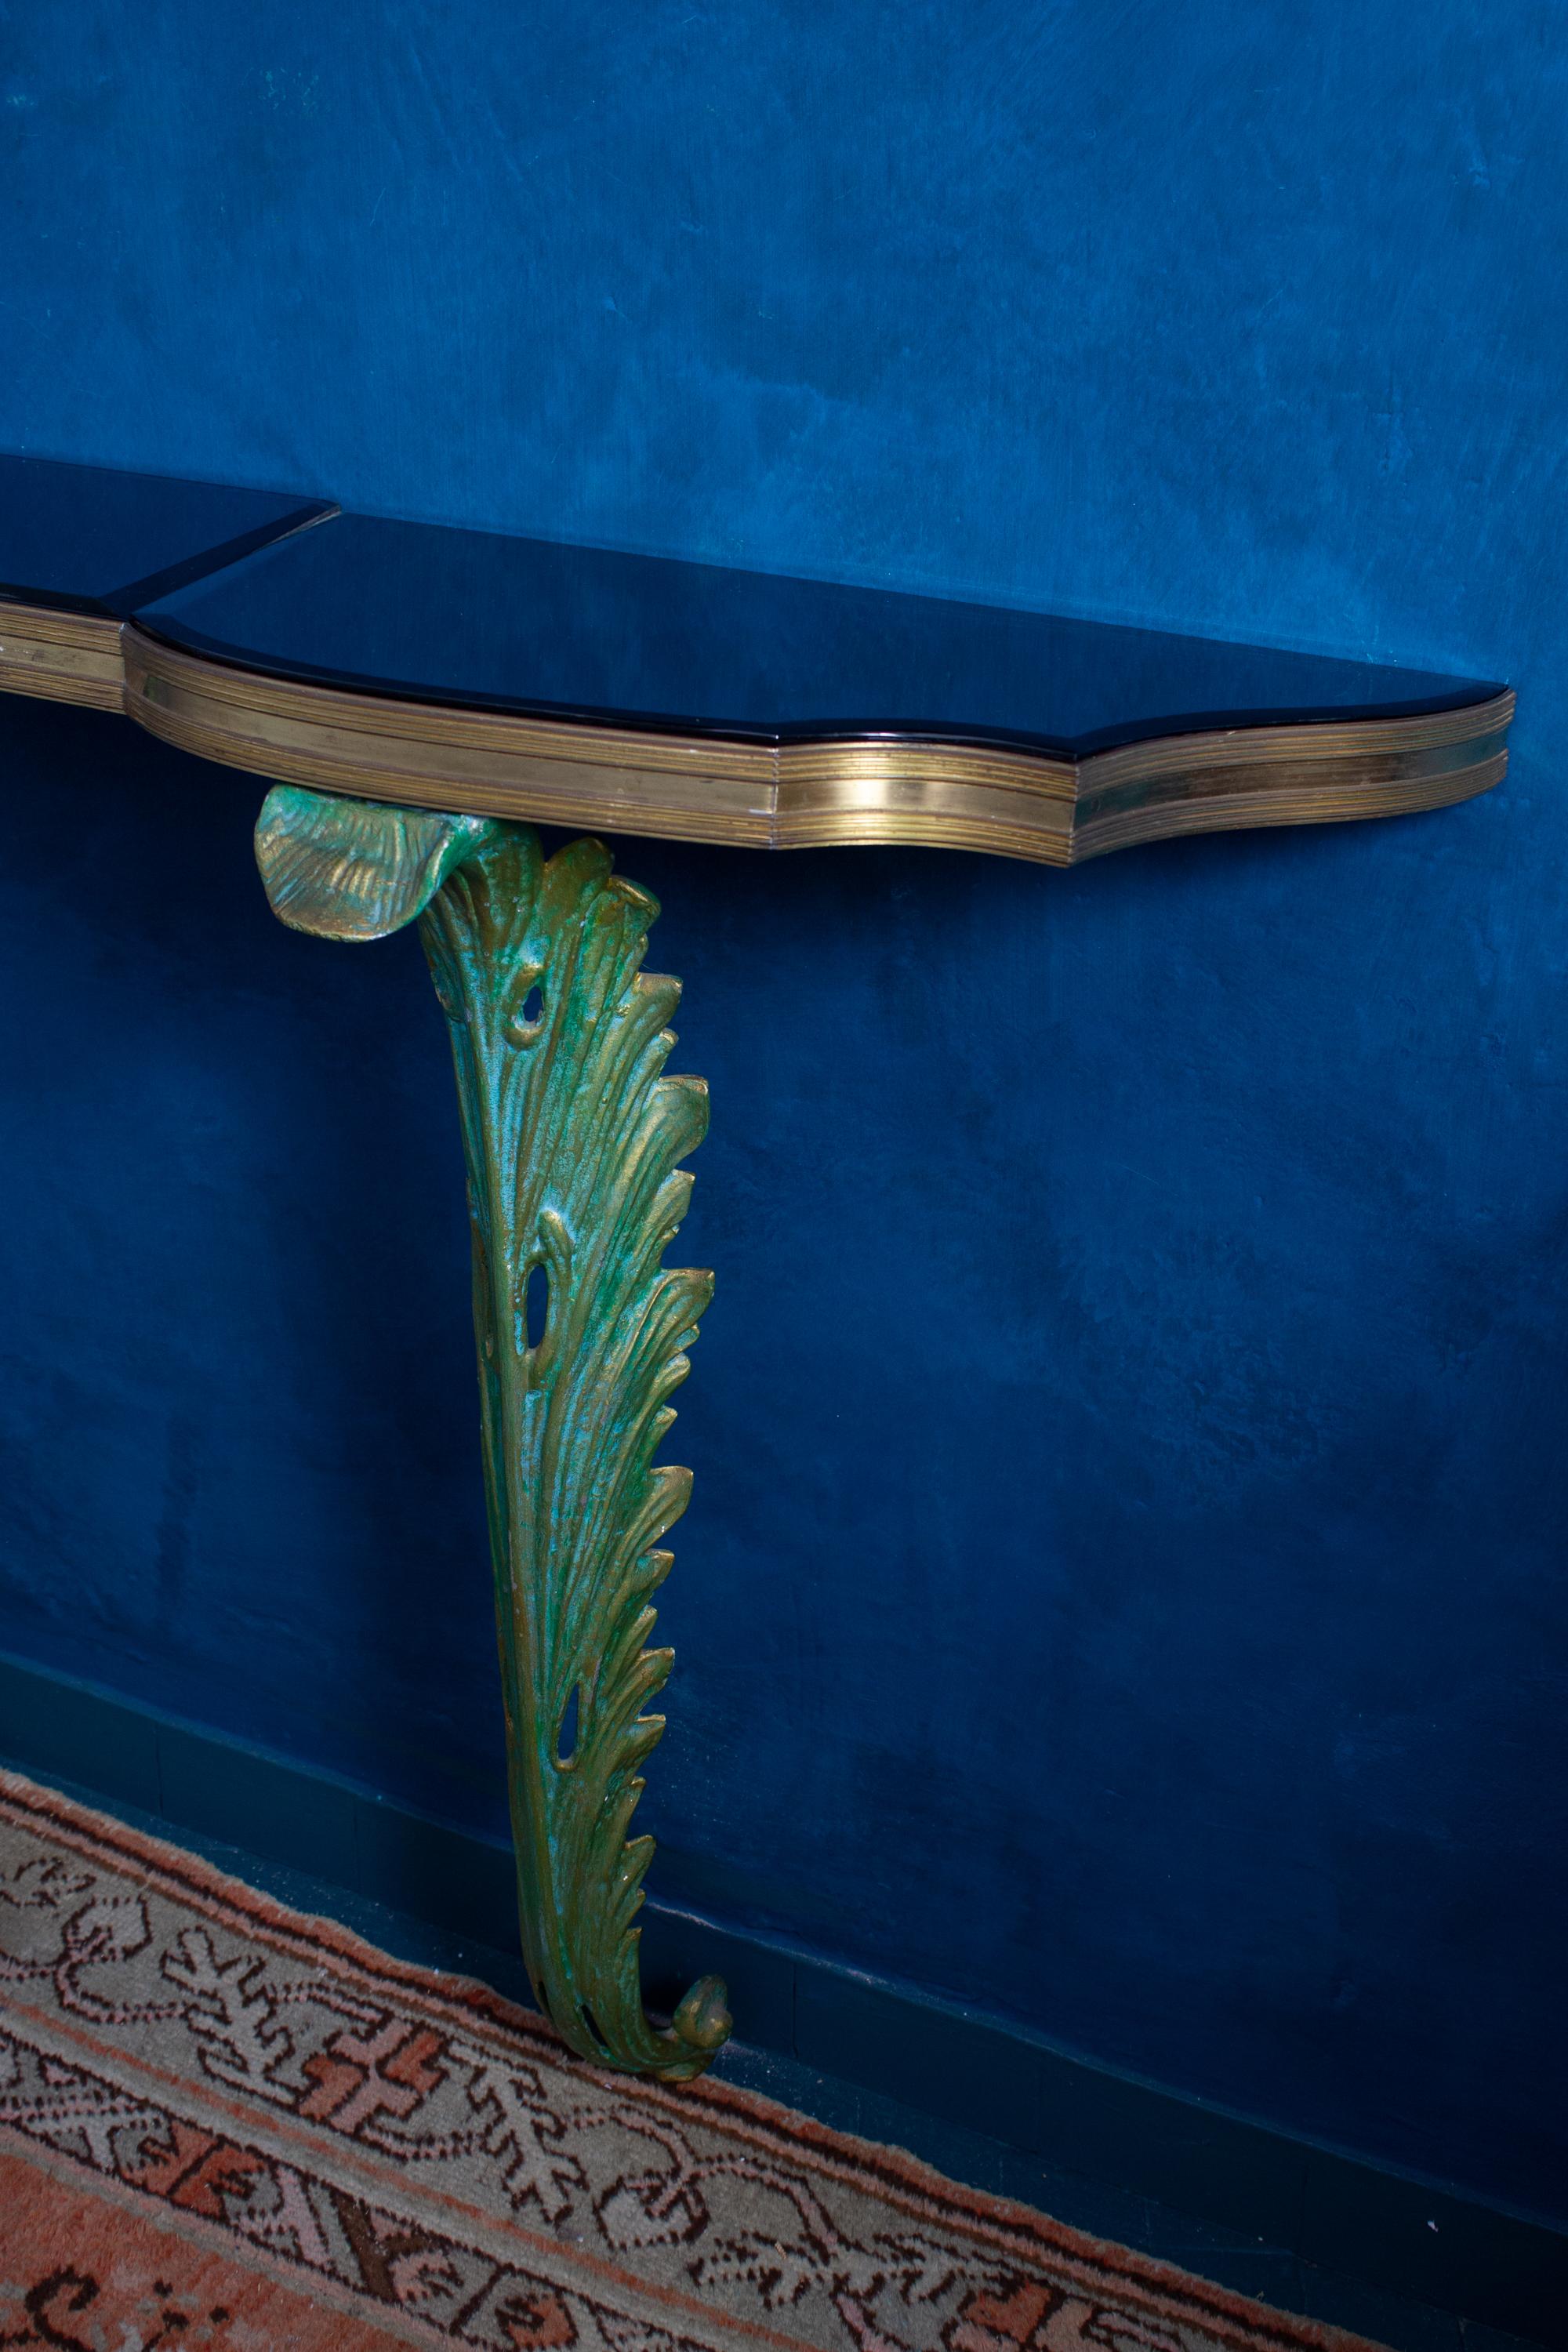 Stunning Midcentury Cristal Art Console Table with Mirror and Sconces, 1950 For Sale 2